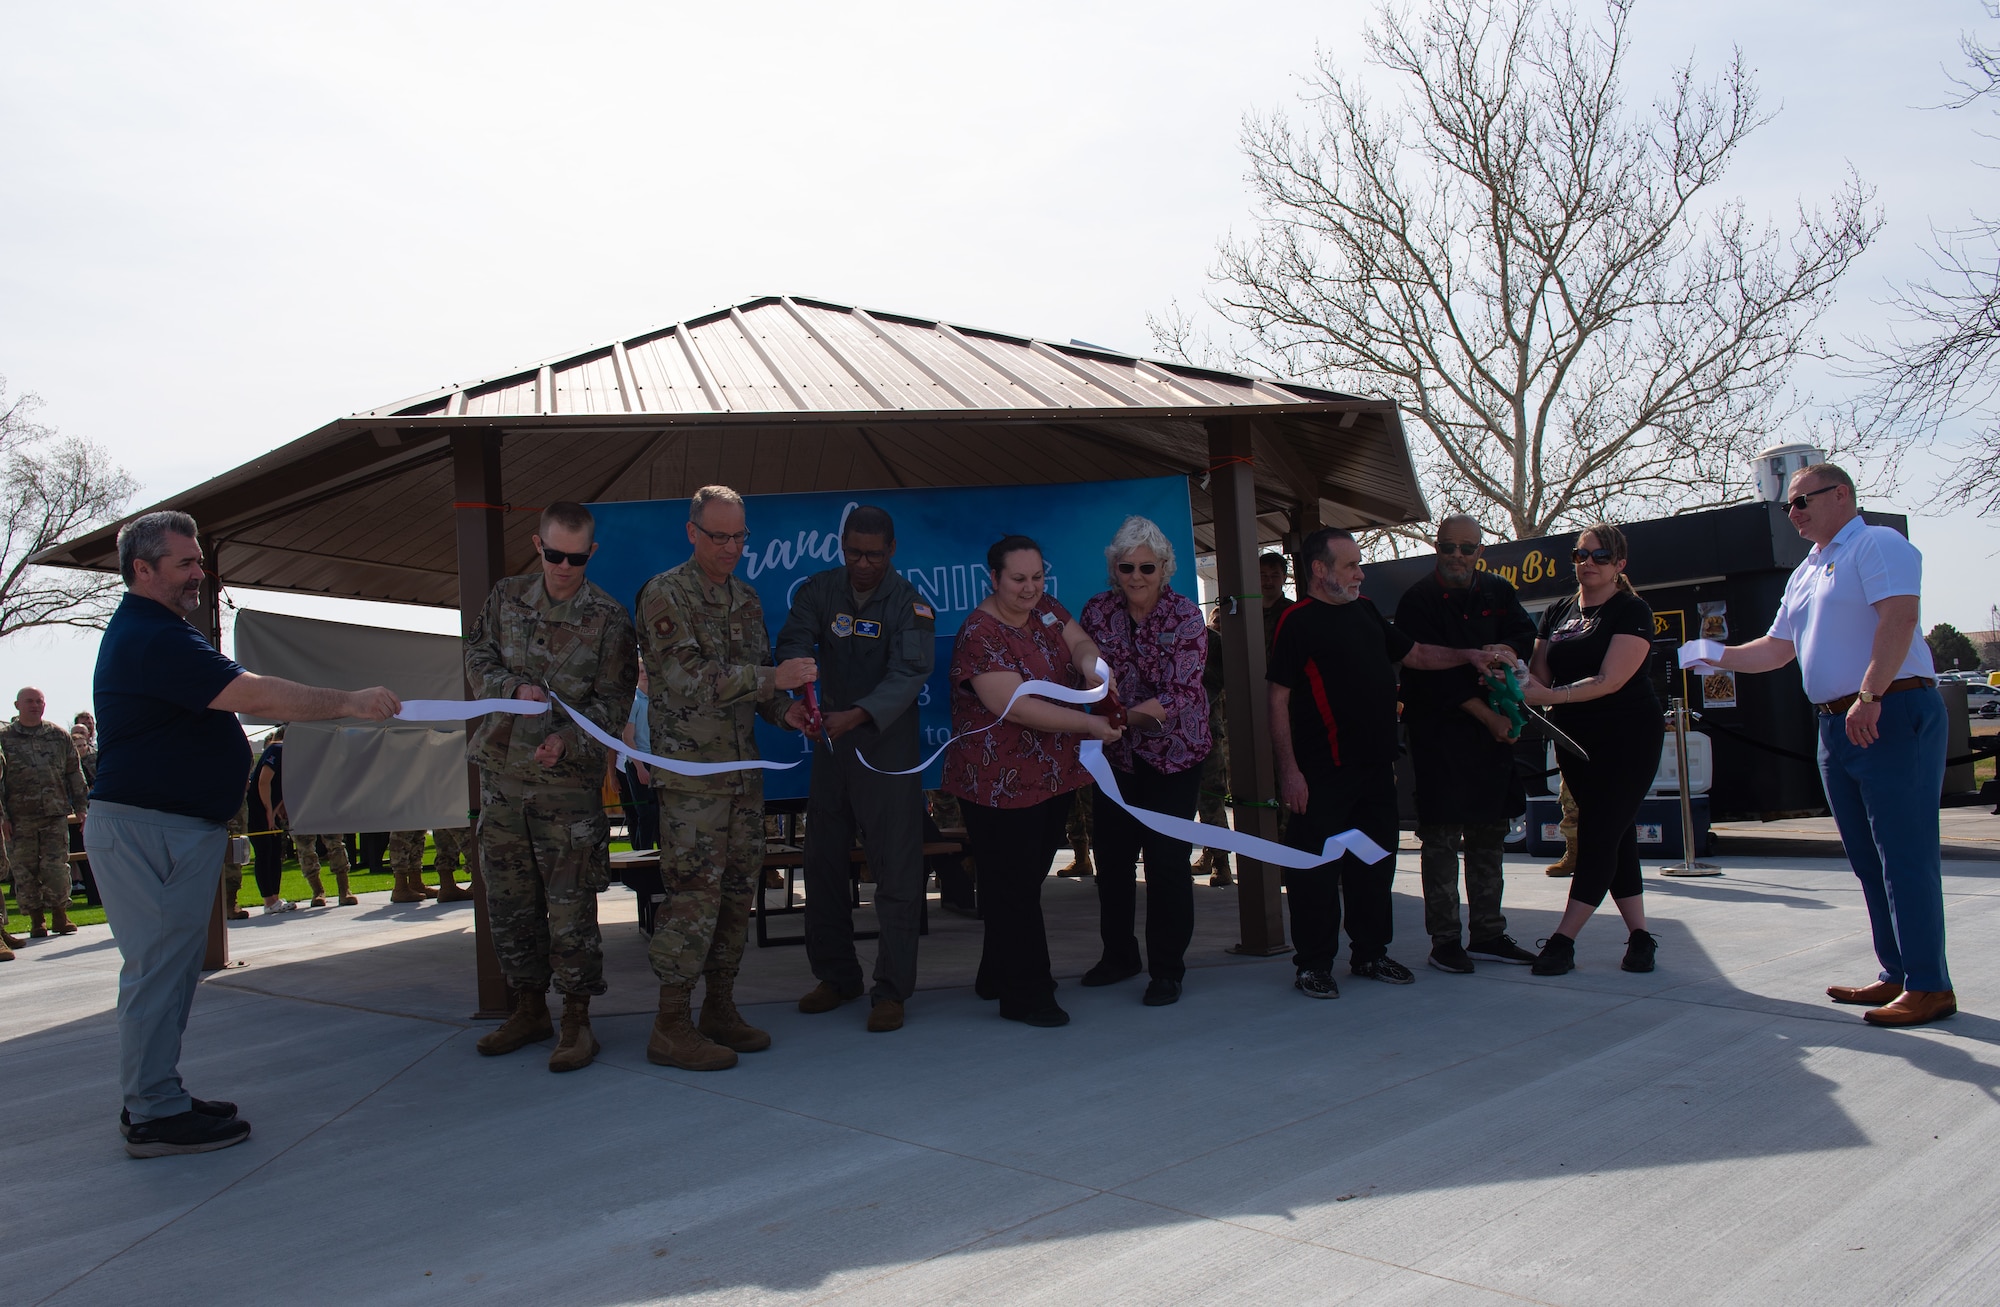 Leaders from the 22nd Air Refueling Wing, Air Mobility Command and Army and Air Force Exchange Service cut a ribbon at the grand opening for the food truck park at McConnell Air Force Base, Kansas, April 4, 2023. The food truck park provides a variety of easily accessible food for Team McConnell servicemembers. The area was designated a no hat, no salute area for the grand opening. (U.S. Air Force photo by Staff Sgt. Tryphena Mayhugh)